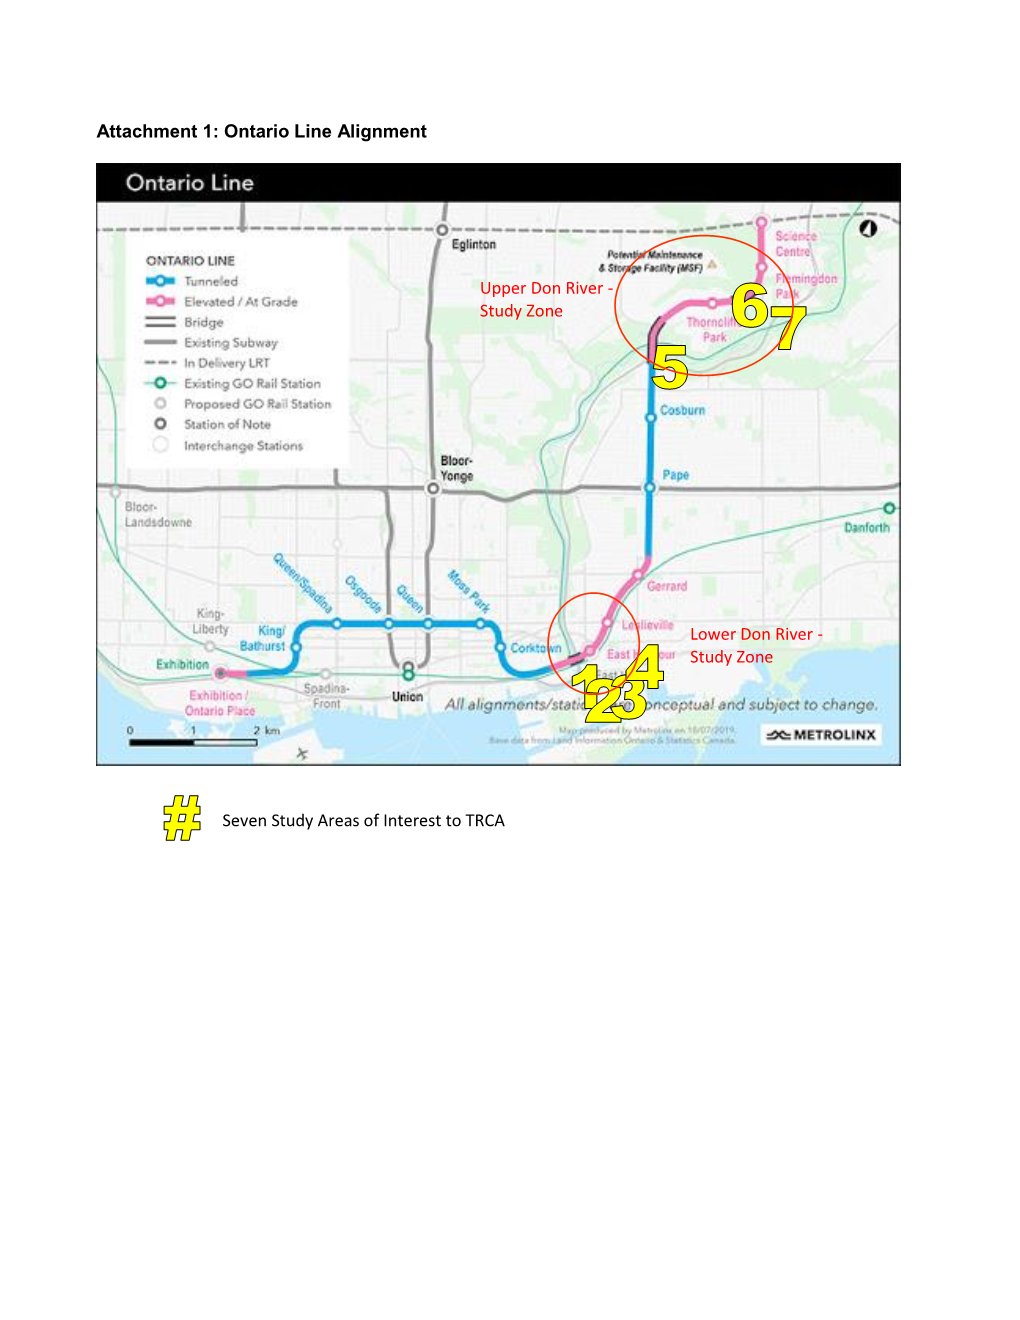 Ontario Line Alignment Seven Study Areas of Interest To